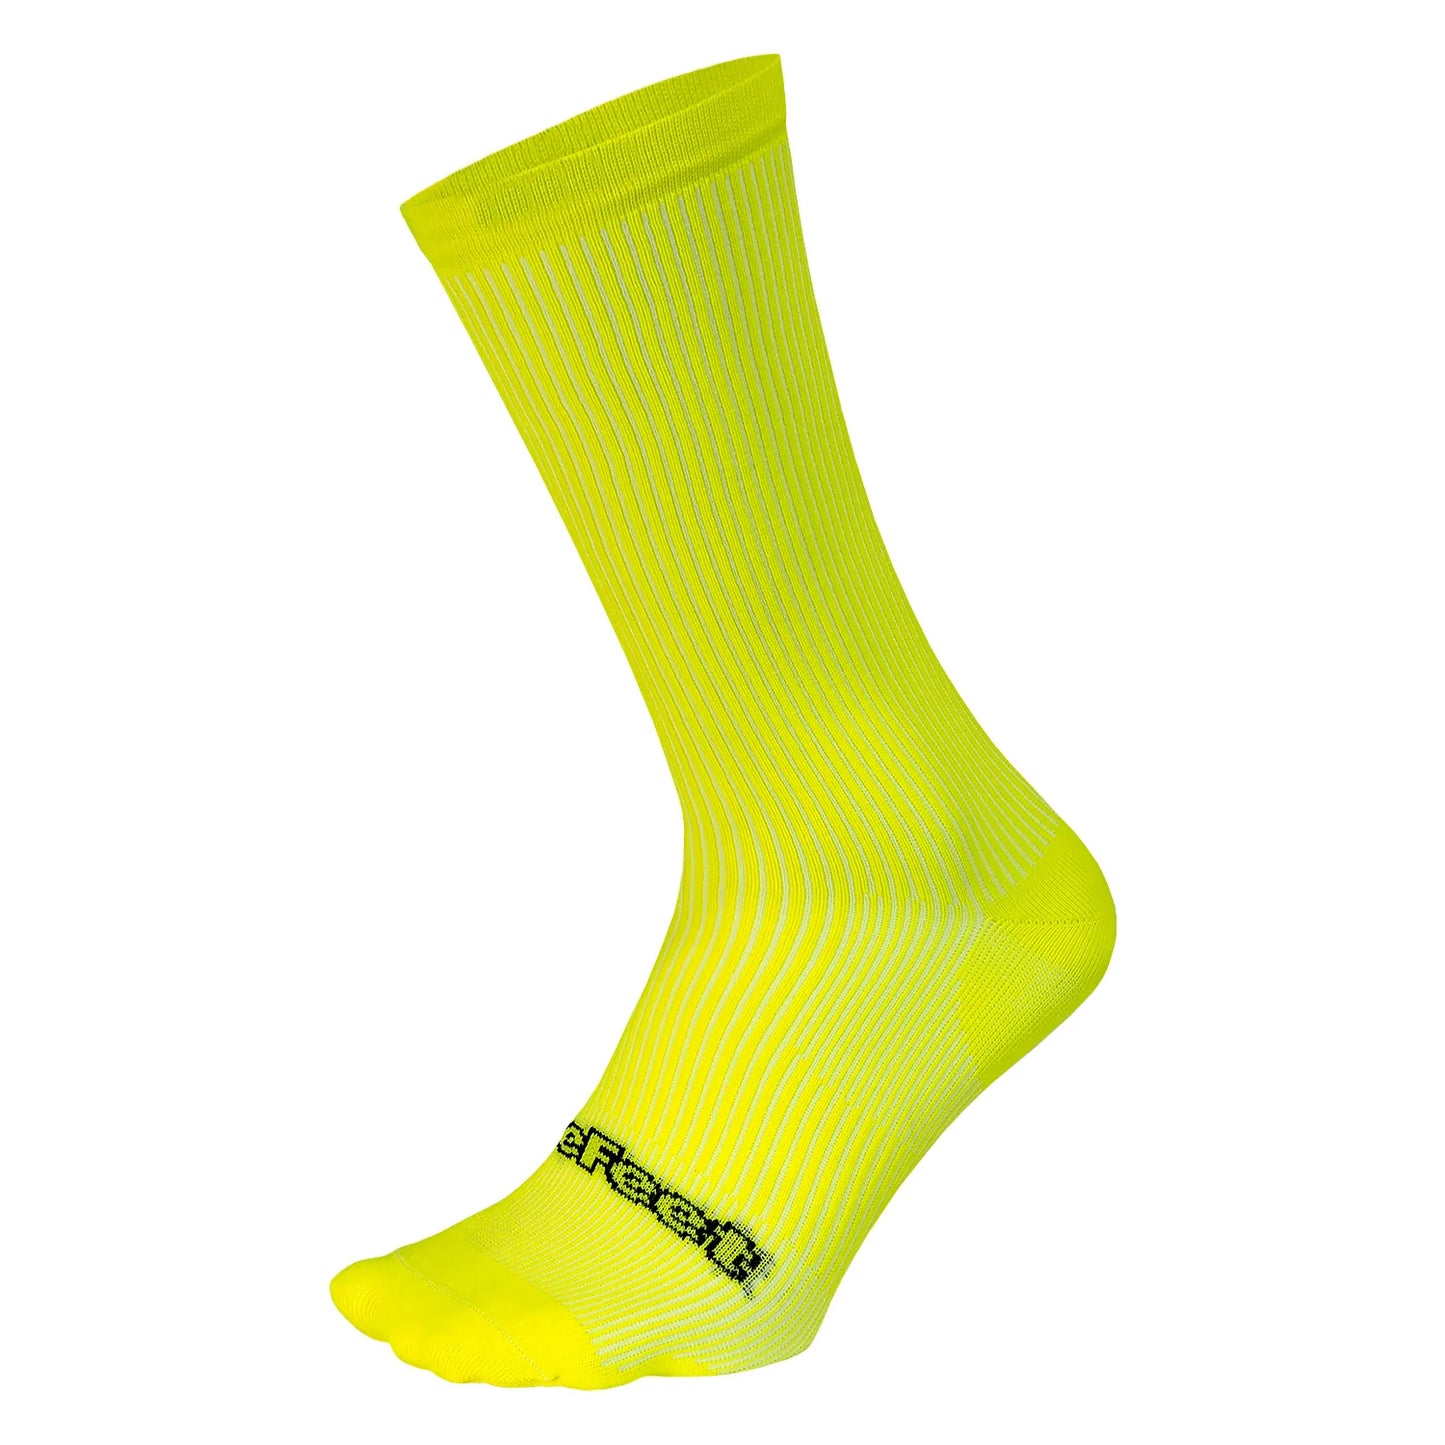 A single hi-vis yellow DeFeet cycling sock with a ribbed cuff and foot